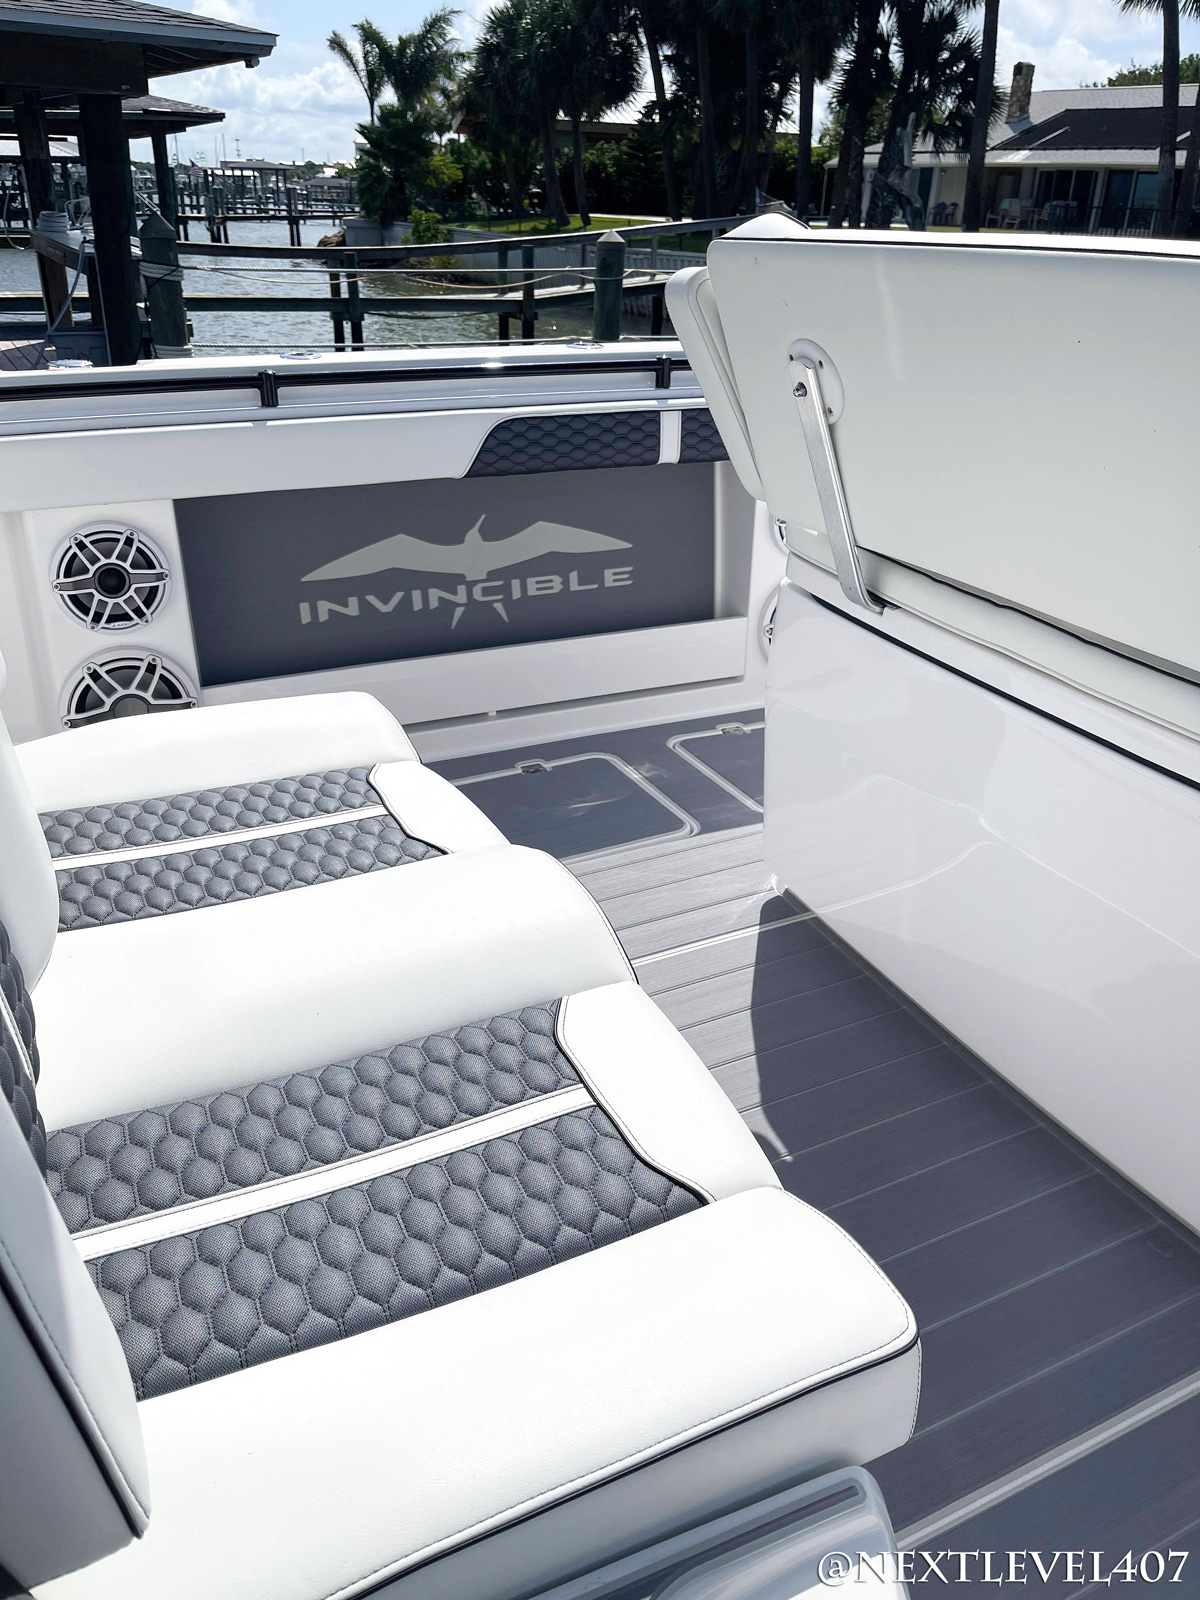 https://floridamarinecustoms.com/wp-content/uploads/2022/01/AFTER-Blue-Invincible-Boat-Custom-SeaDek-Marine-Flooring-Pad-Upgraded-Speakers-Close-Up-Custom-Logo-Pad-On-Water-Leather-Upholstery-Seats-Grey-Center-Console-Fishing-Pole-Holder.jpg